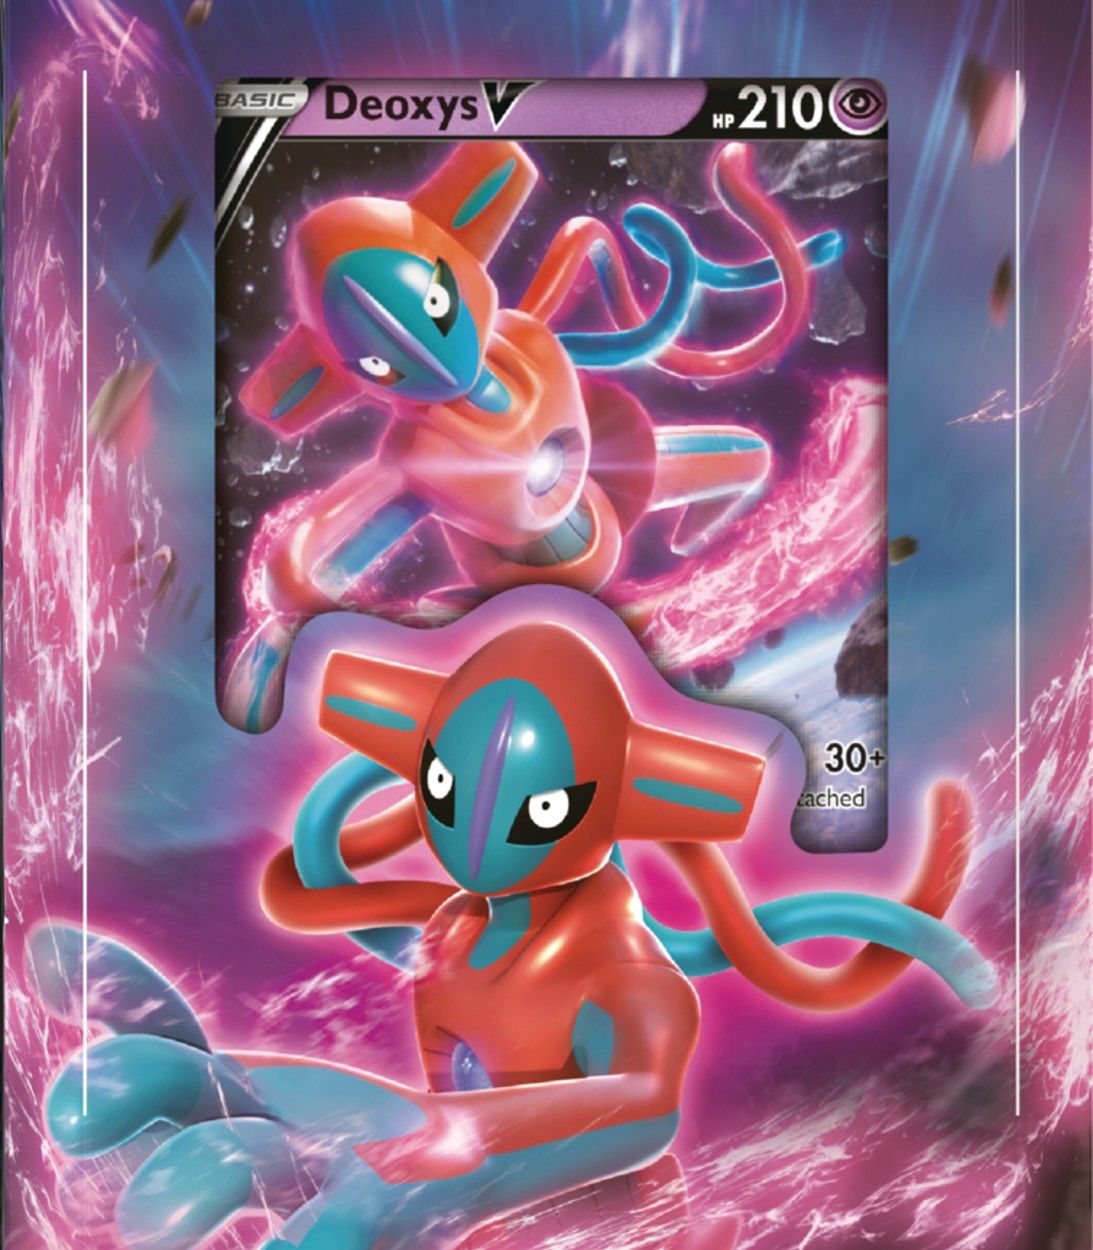 Close up image of the box art for the Deoxys V Battle Deck 